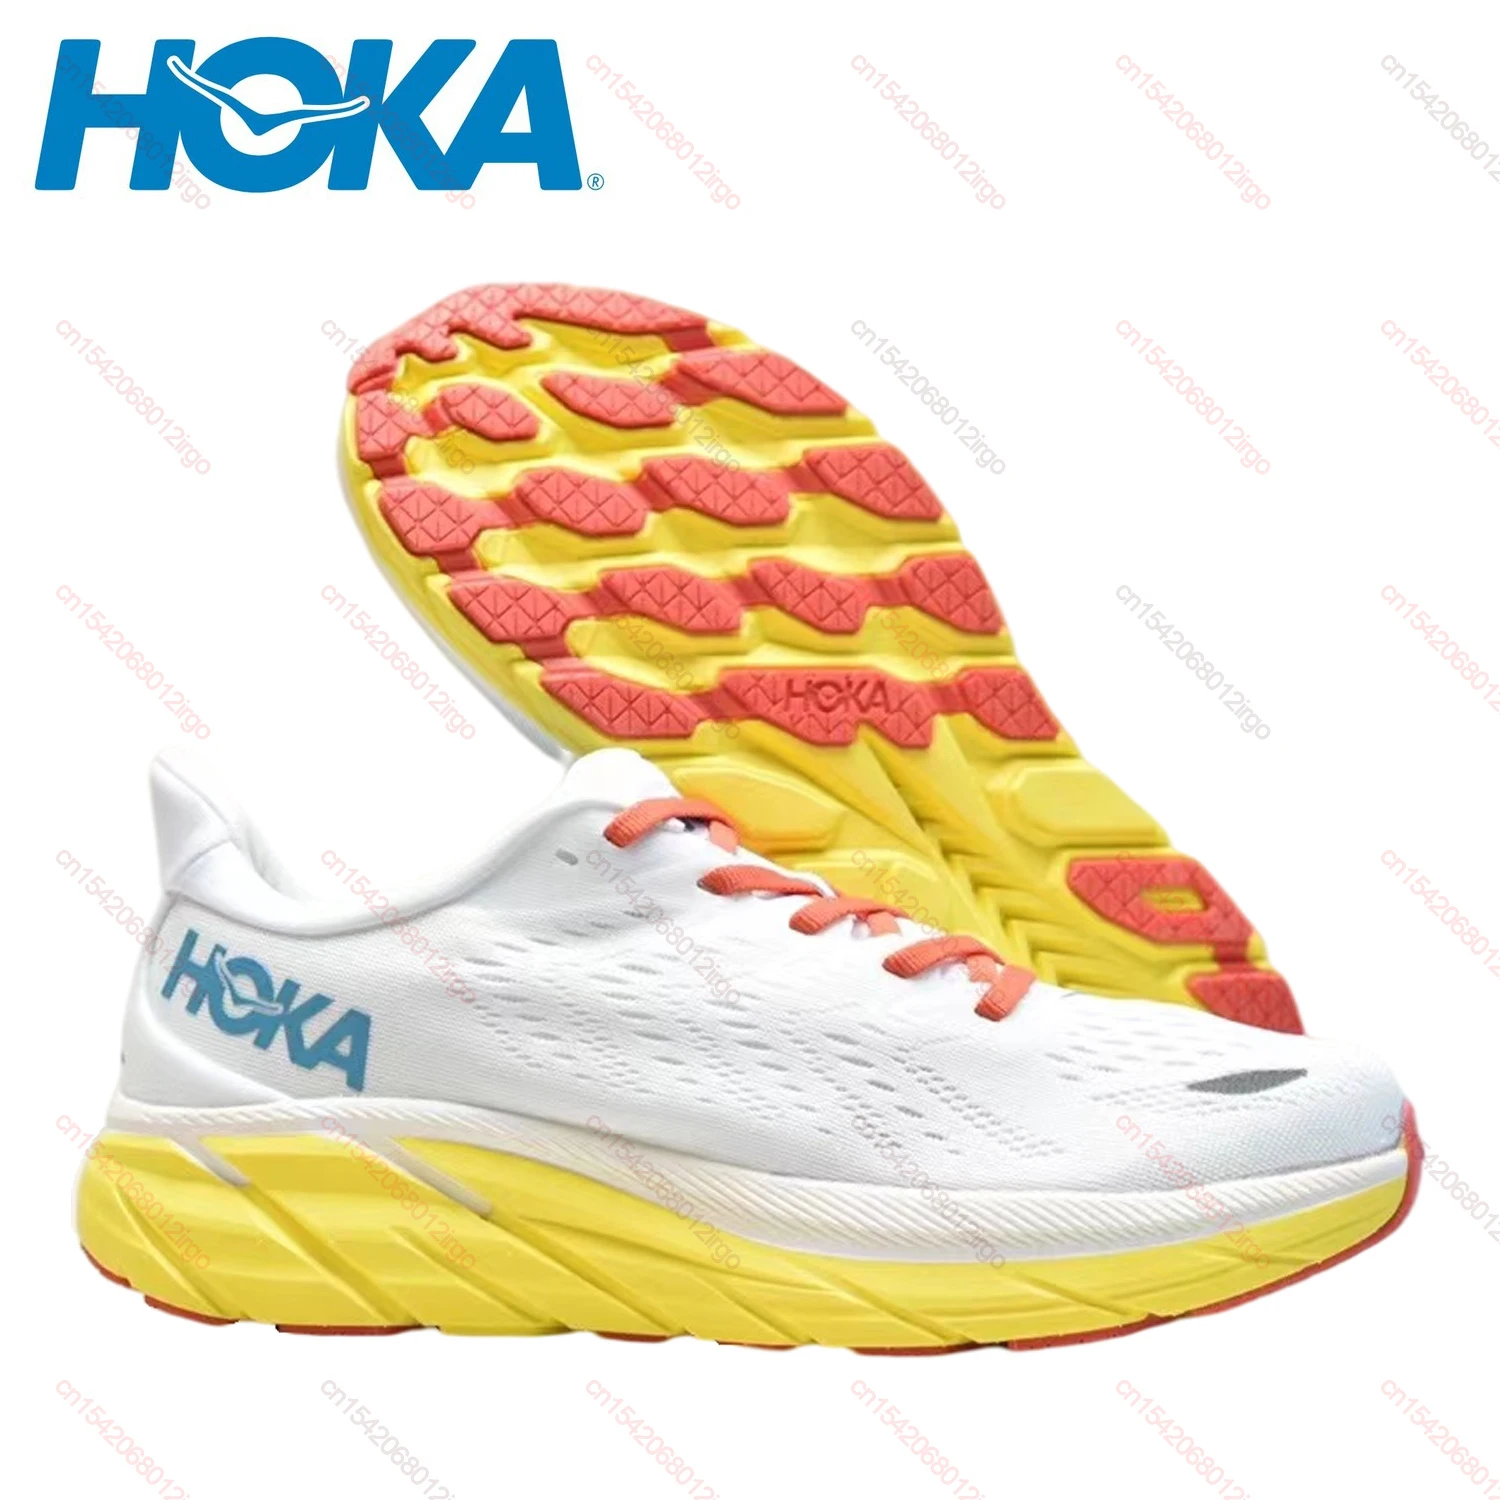 HOKA Clifton 8 Men Sports Shoes Sneakers Cushioning Running Shoes Mesh Breathable Casual Outdoor Marathon Light Training Shoes